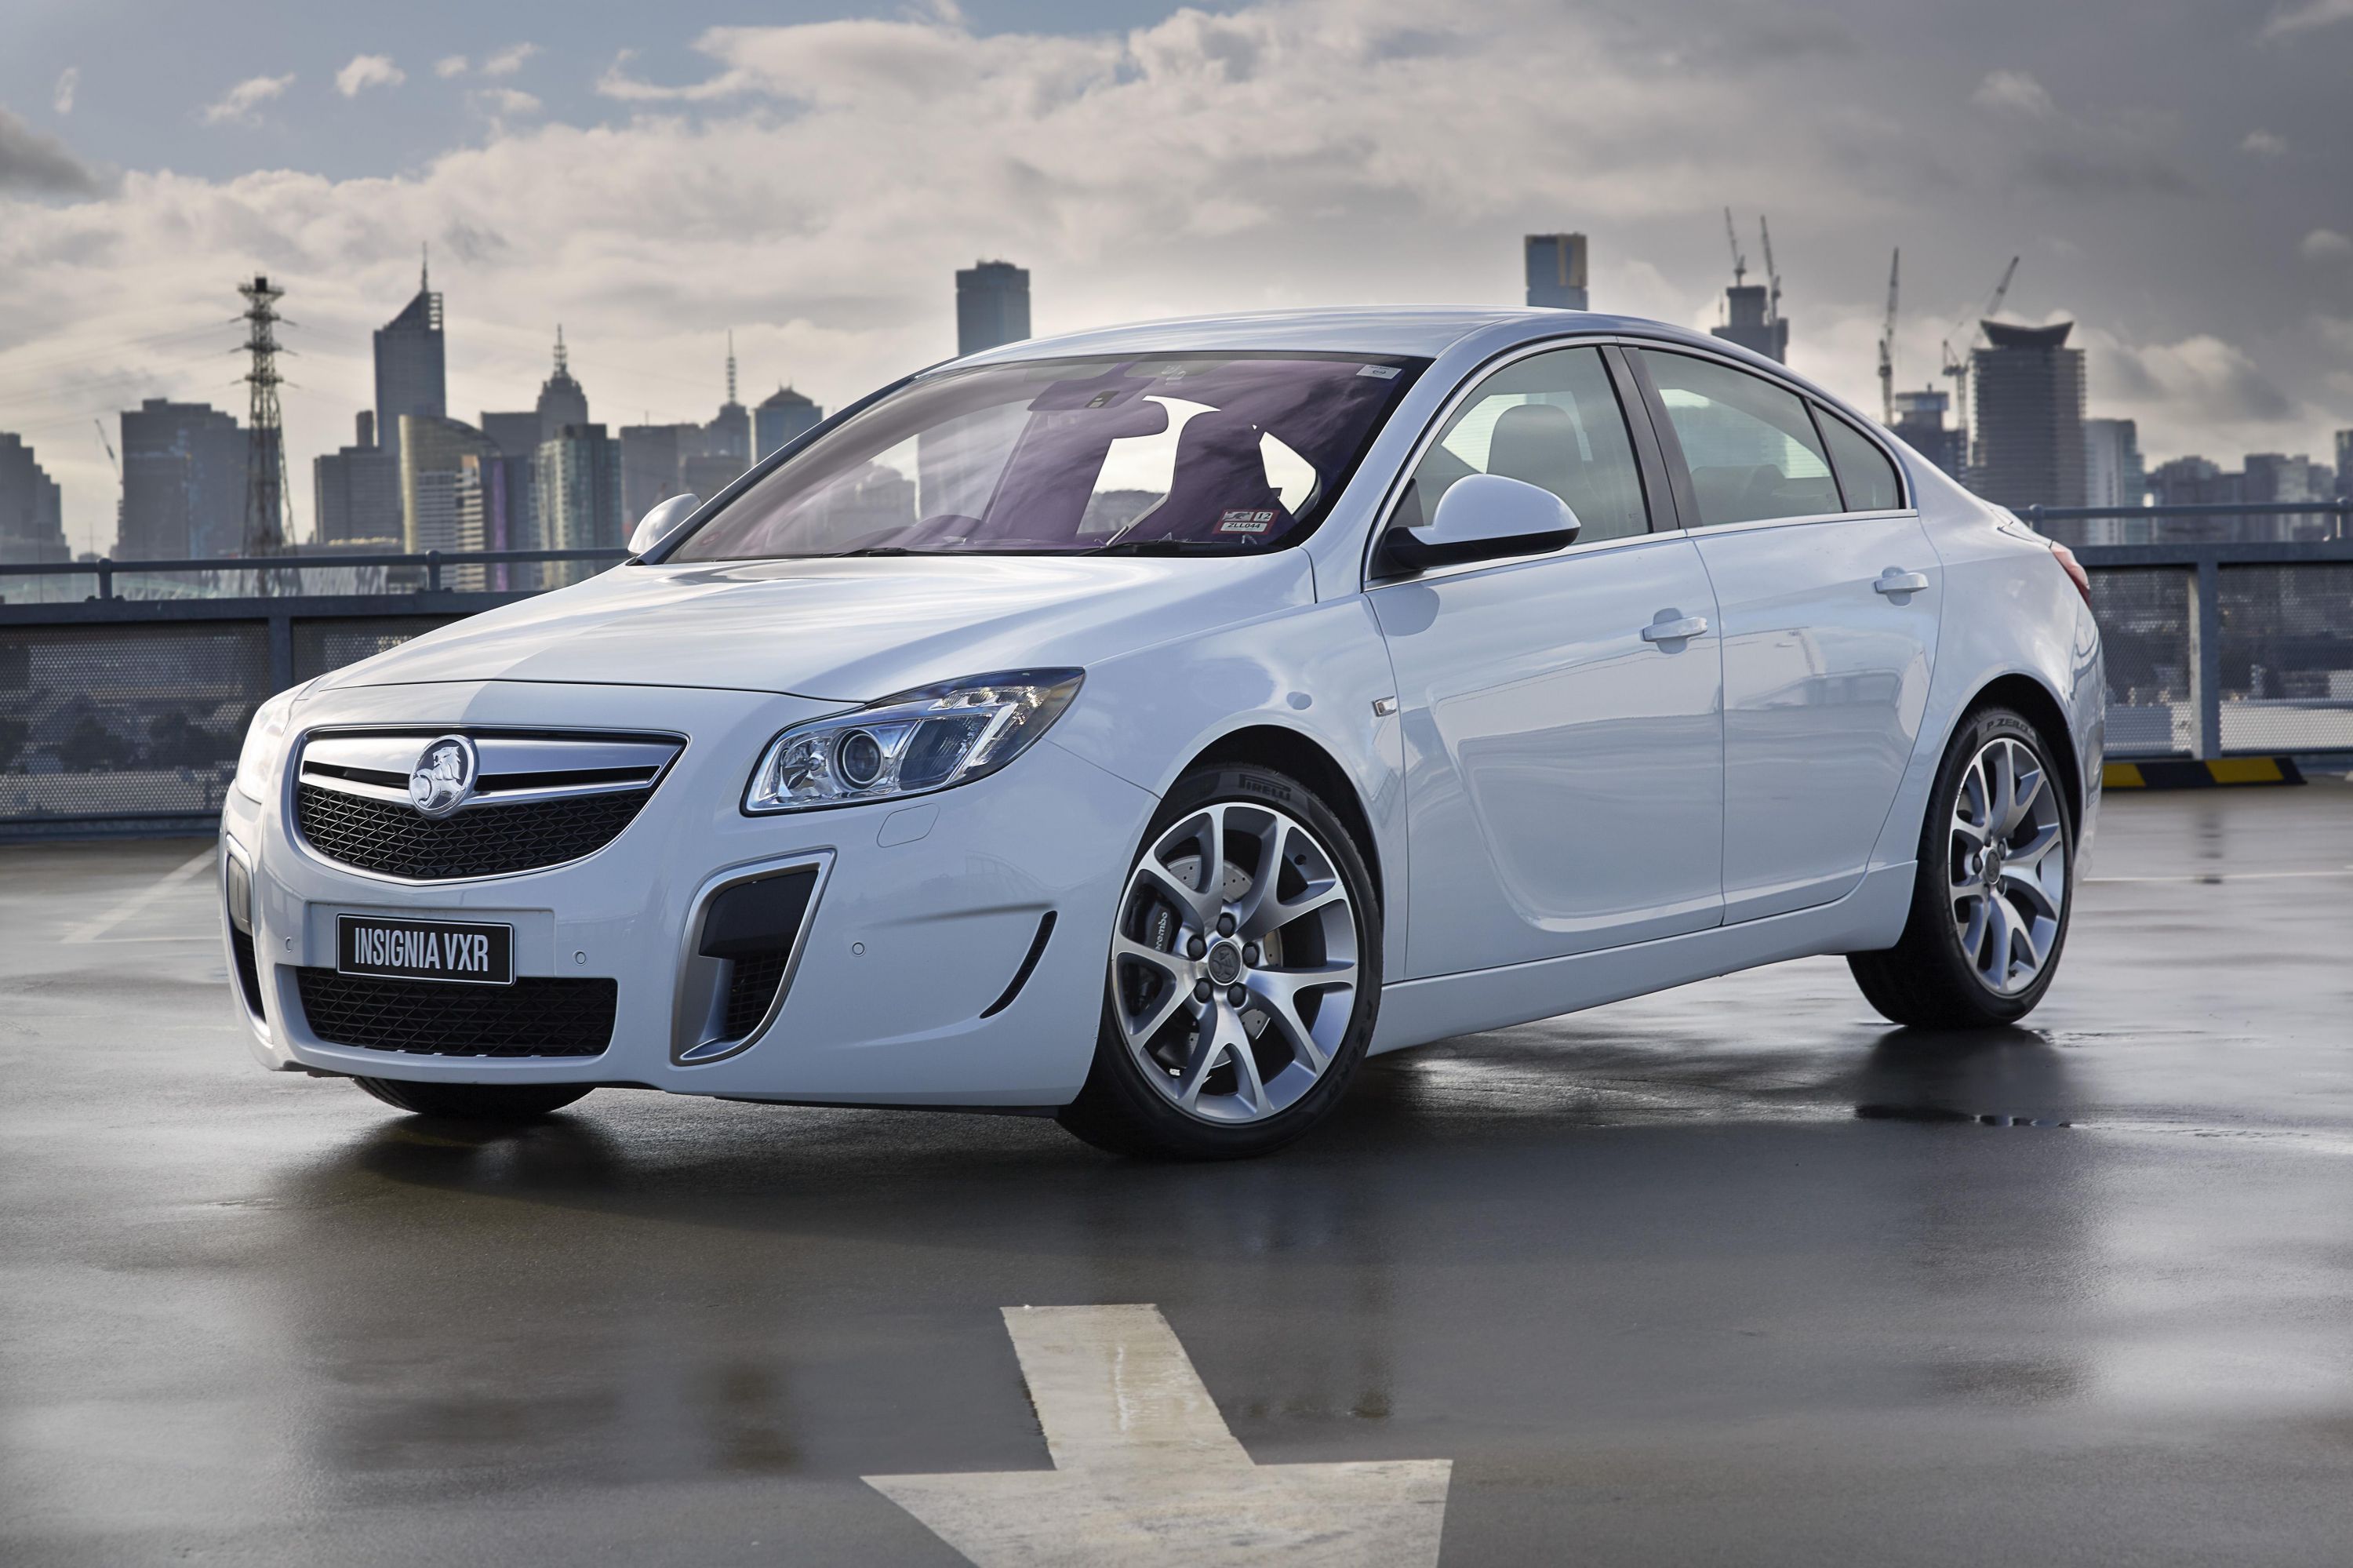 Opel Insignia to be axed following the retirement of its Vauxhall twin